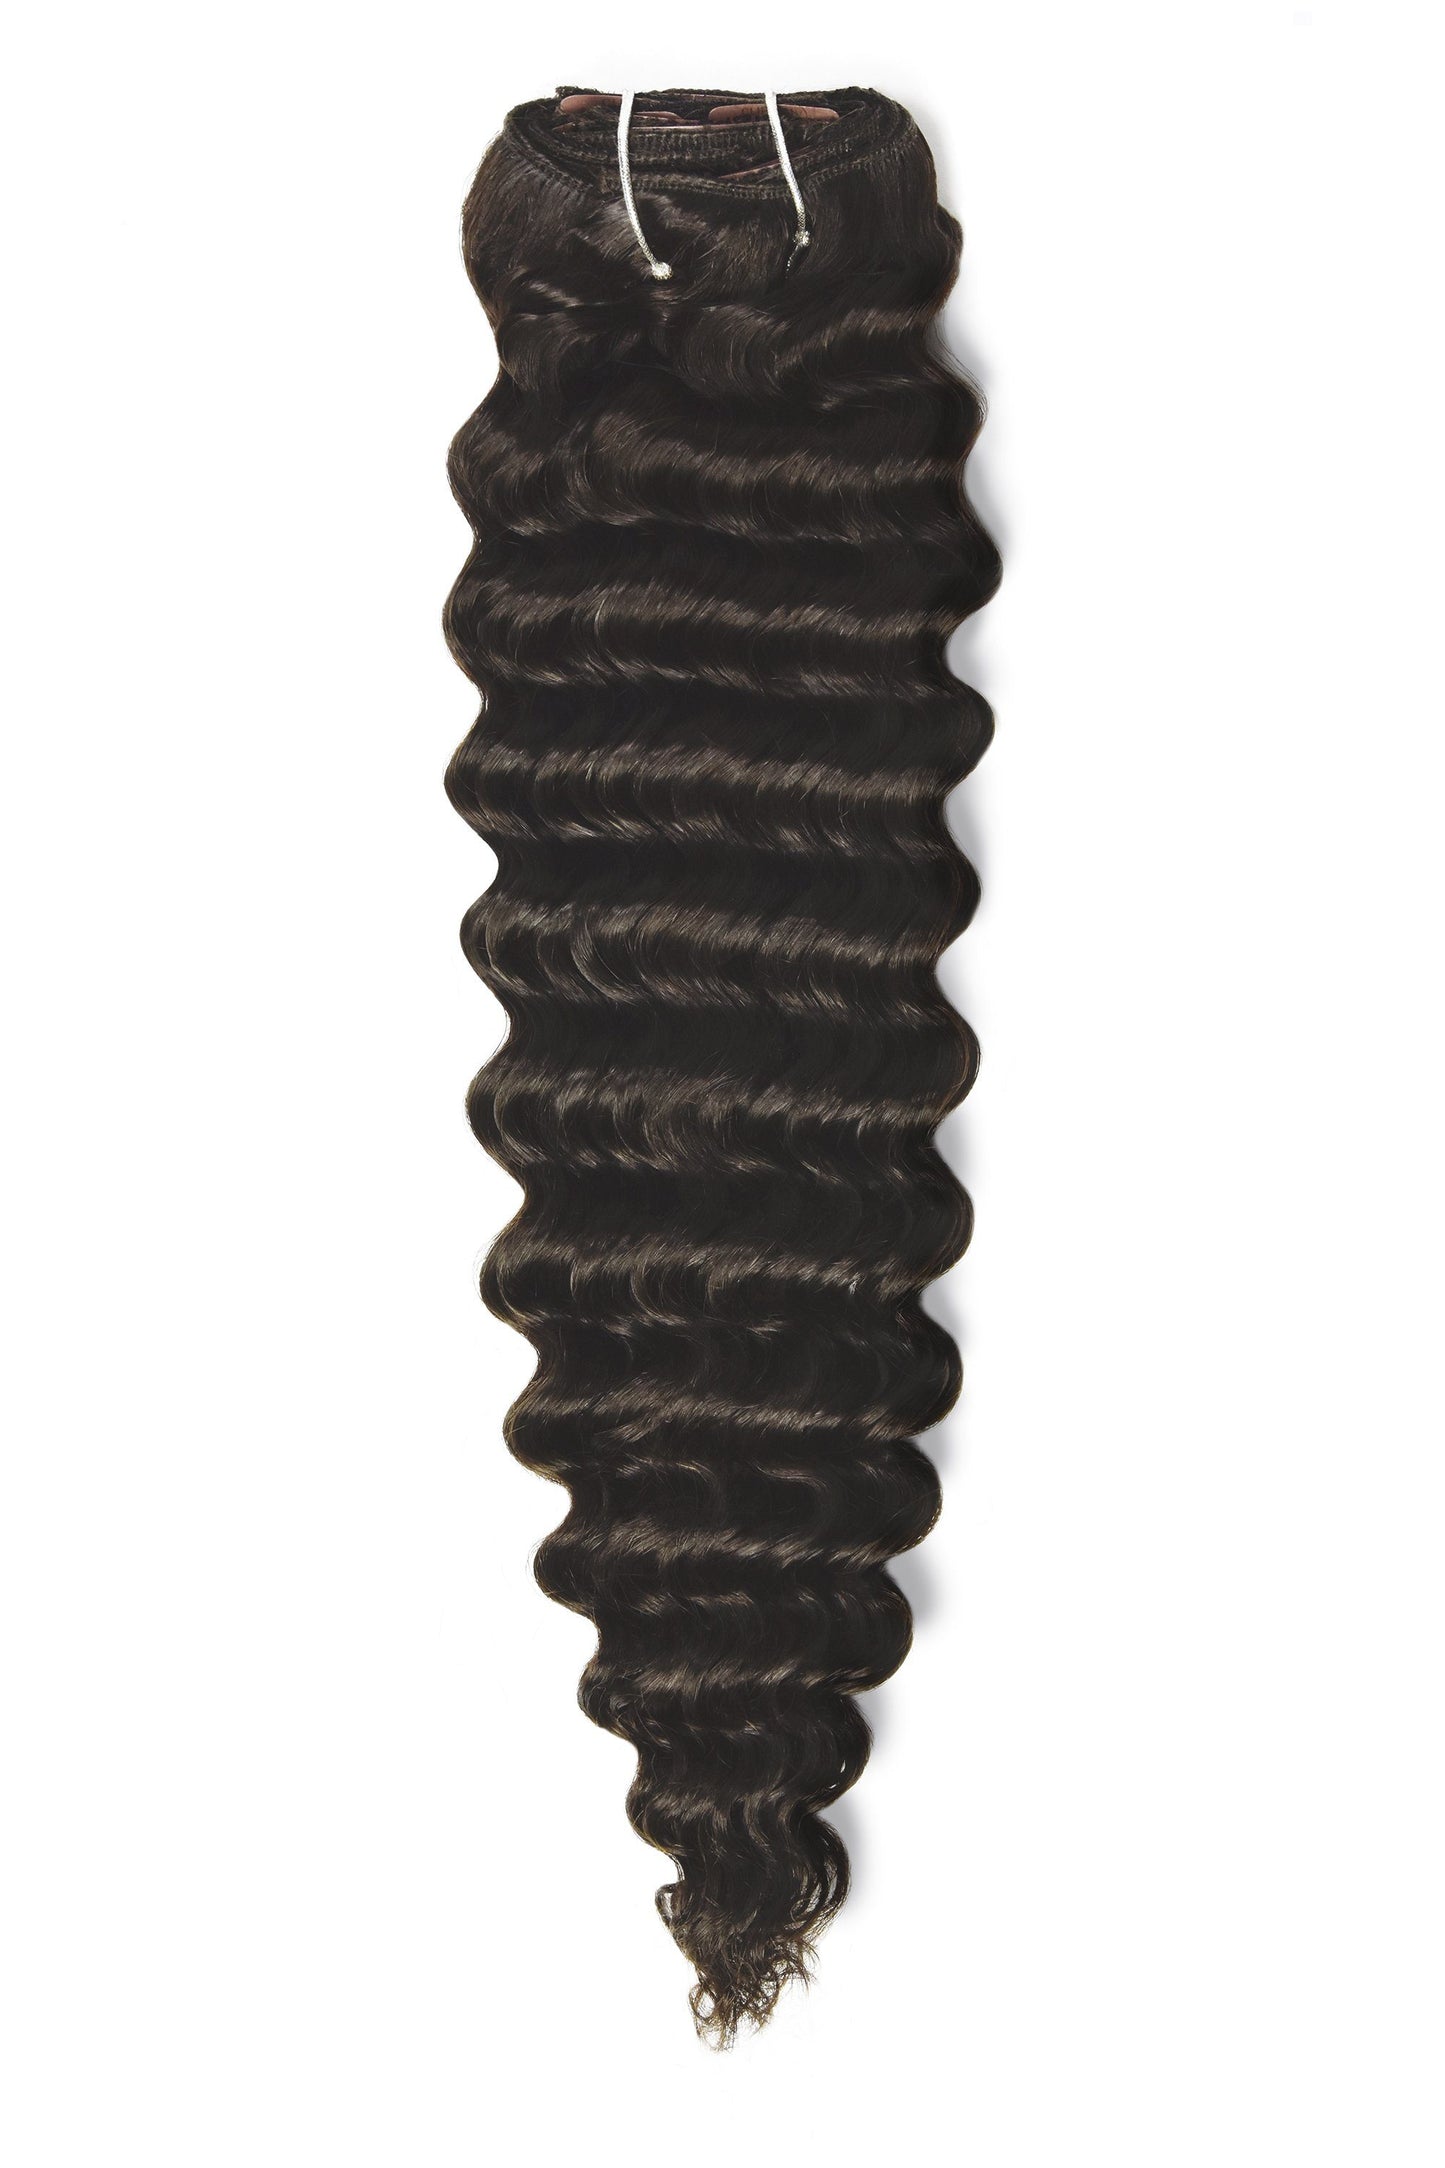 Curly Full Head Remy Clip in Human Hair Extensions - Darkest Brown (#2) Curly Clip In Hair Extensions cliphair 